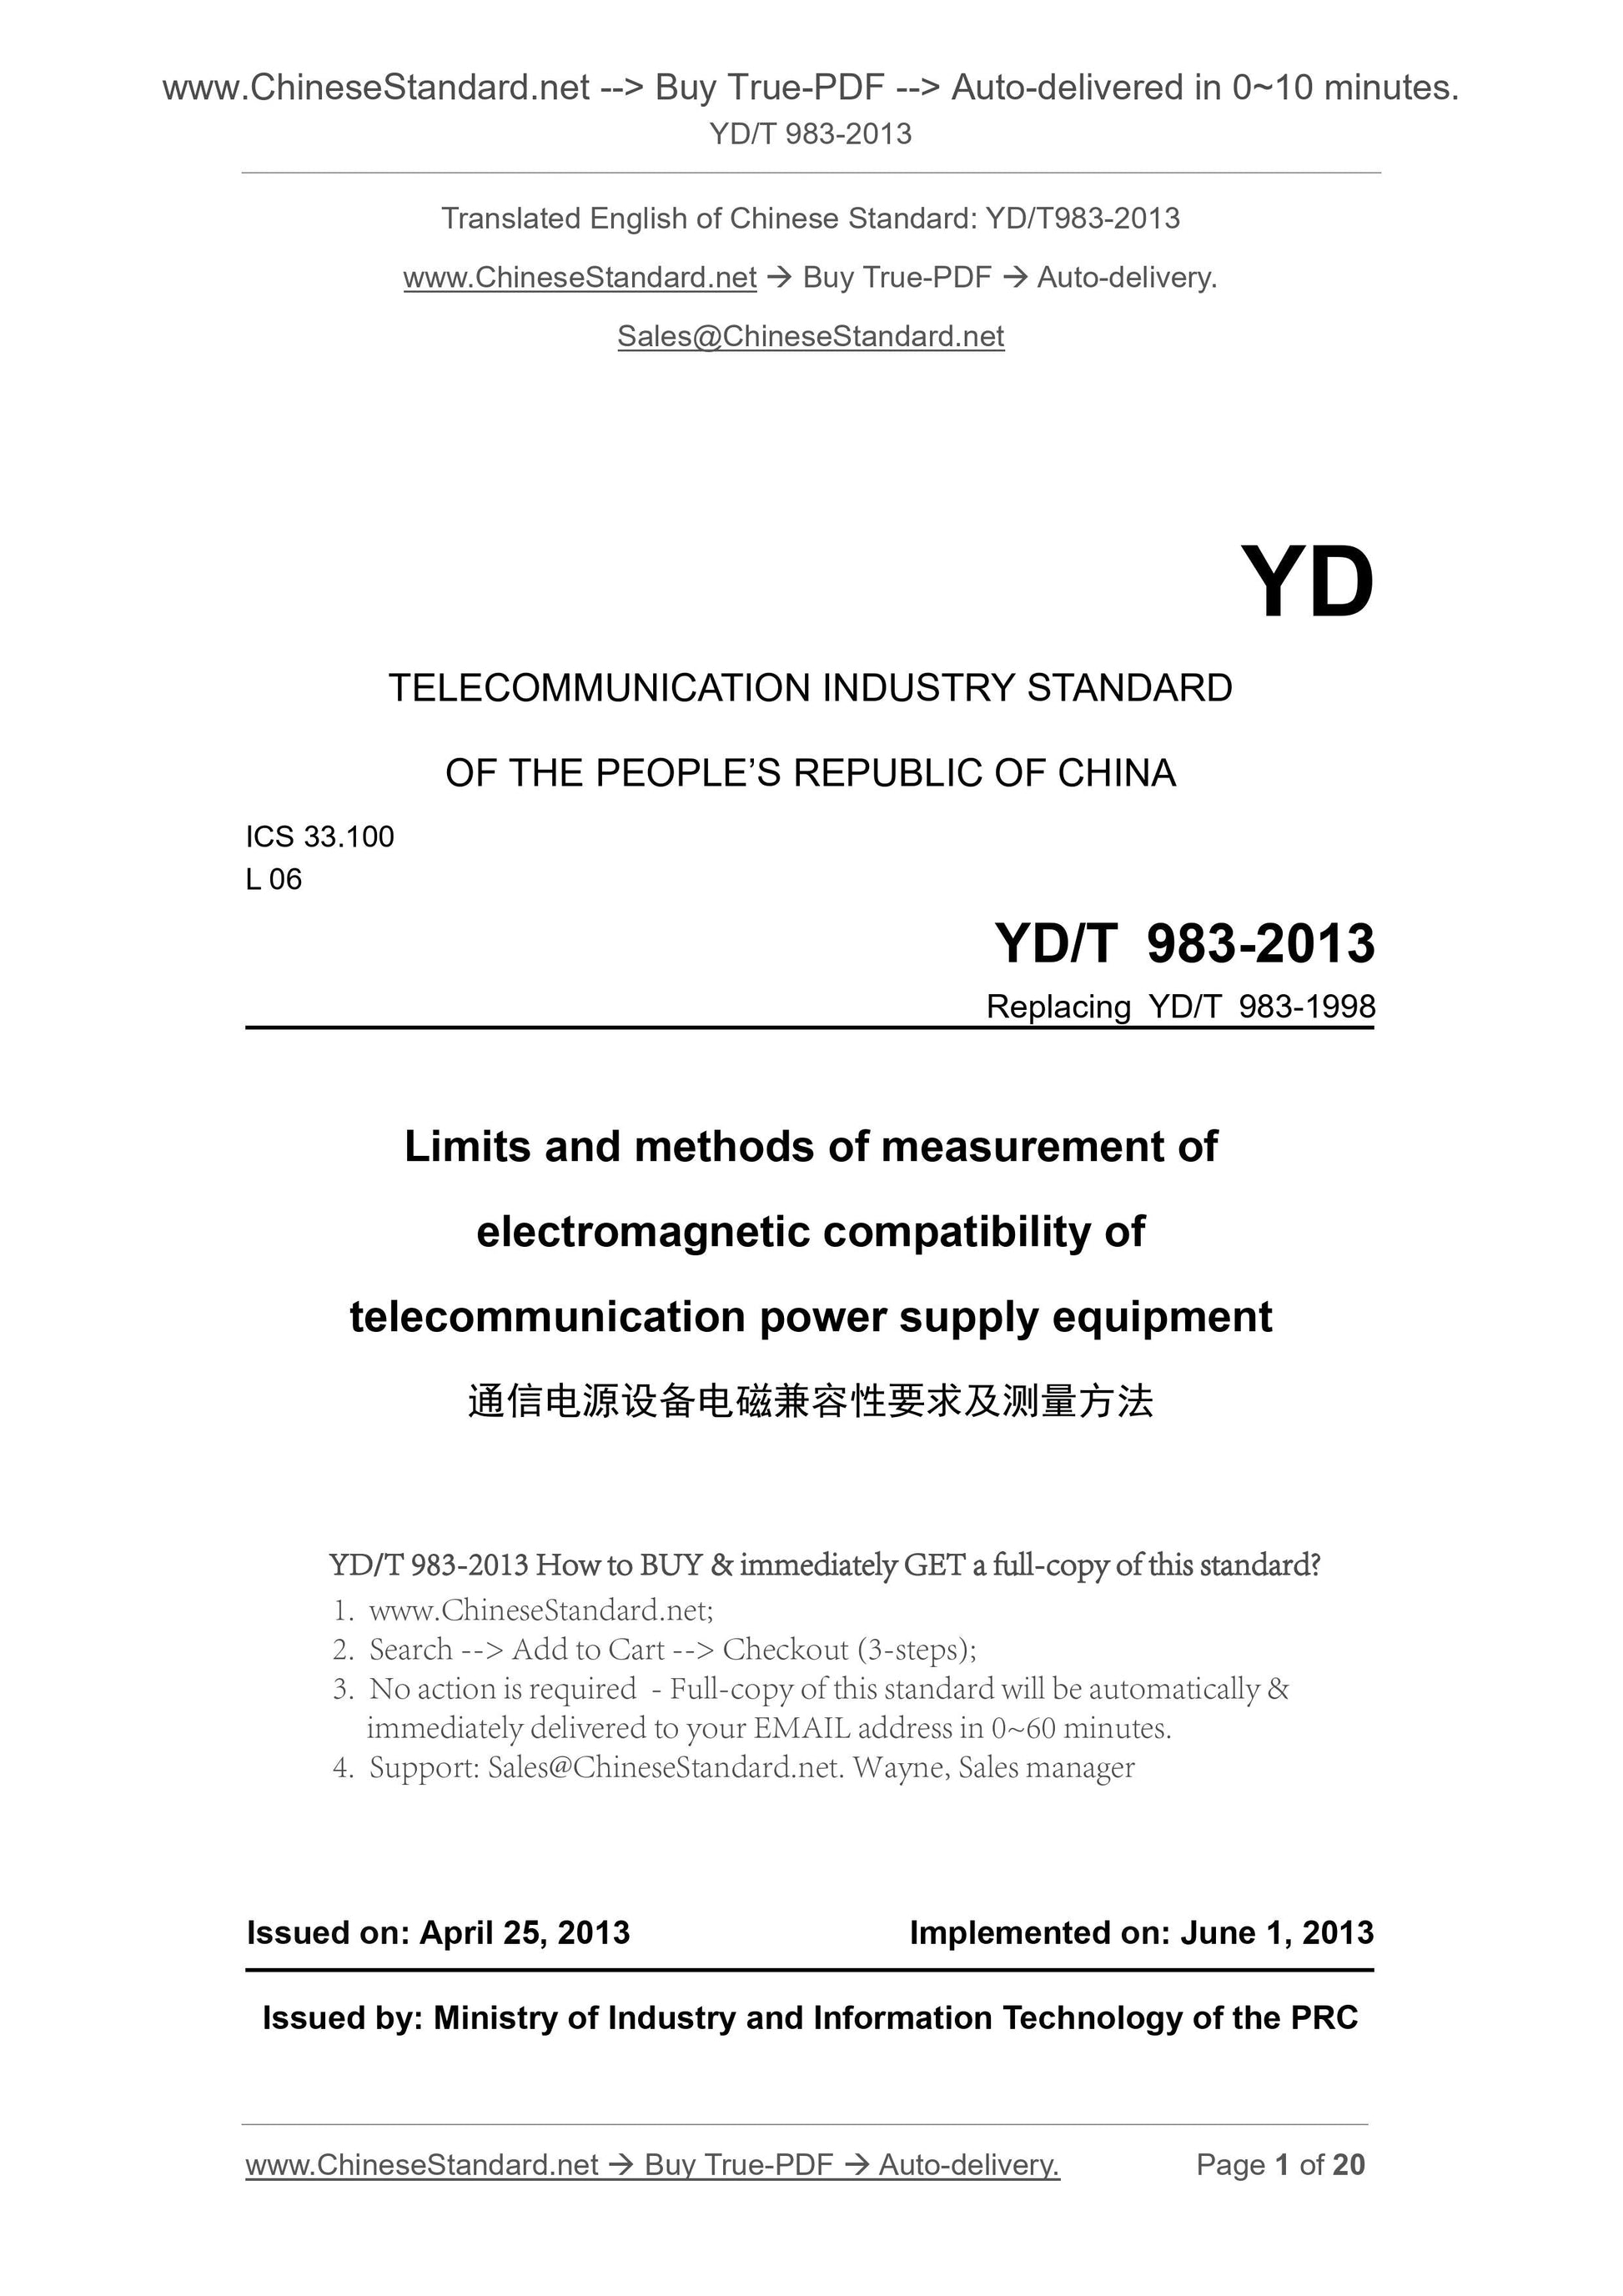 YD/T 983-2013 Page 1